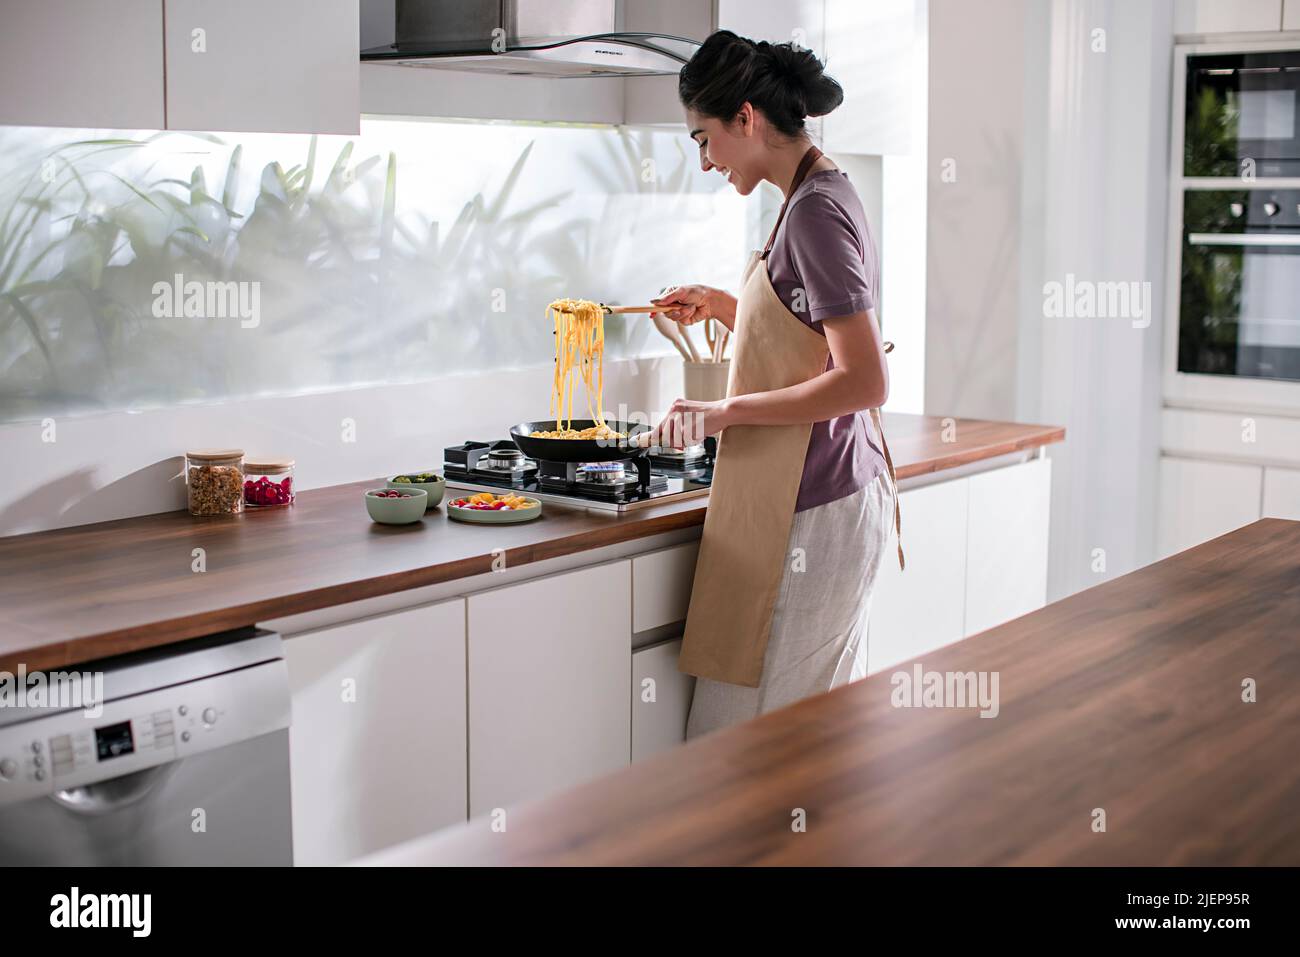 Side profile of a young woman cooking noodles in the kitchen Stock Photo